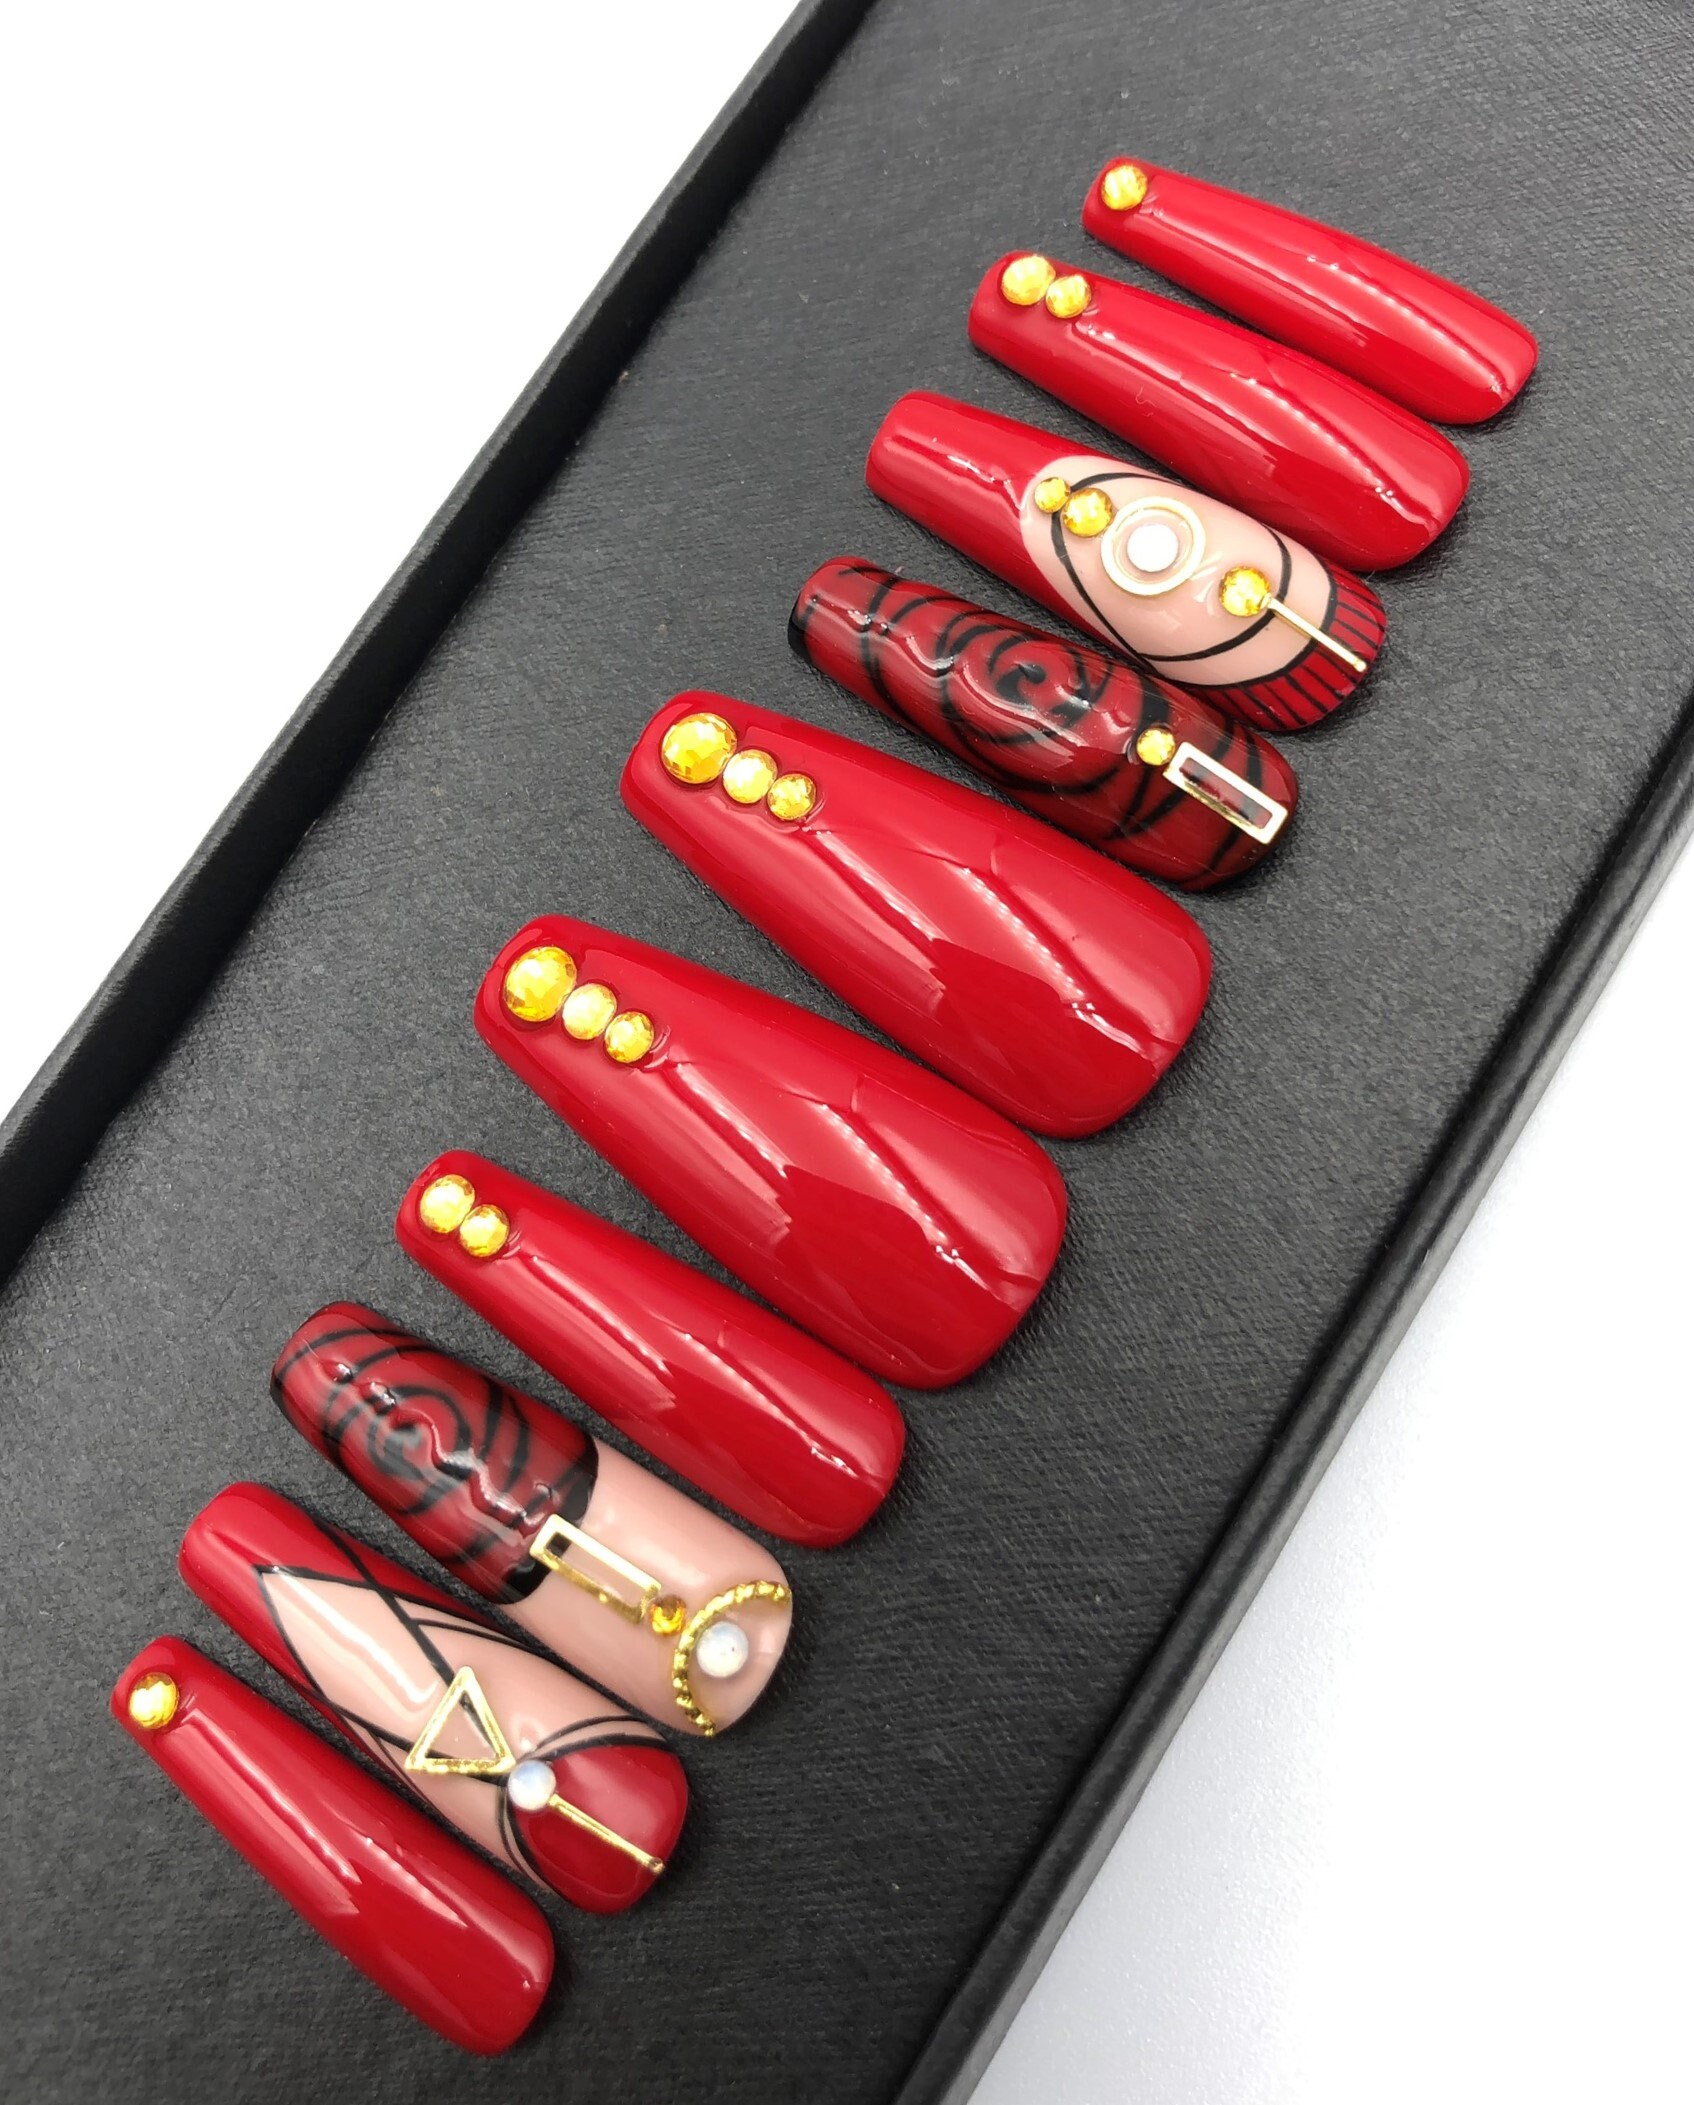 Red Luxury Nails-fake Nails Glue on Nails Press on Nails - Etsy